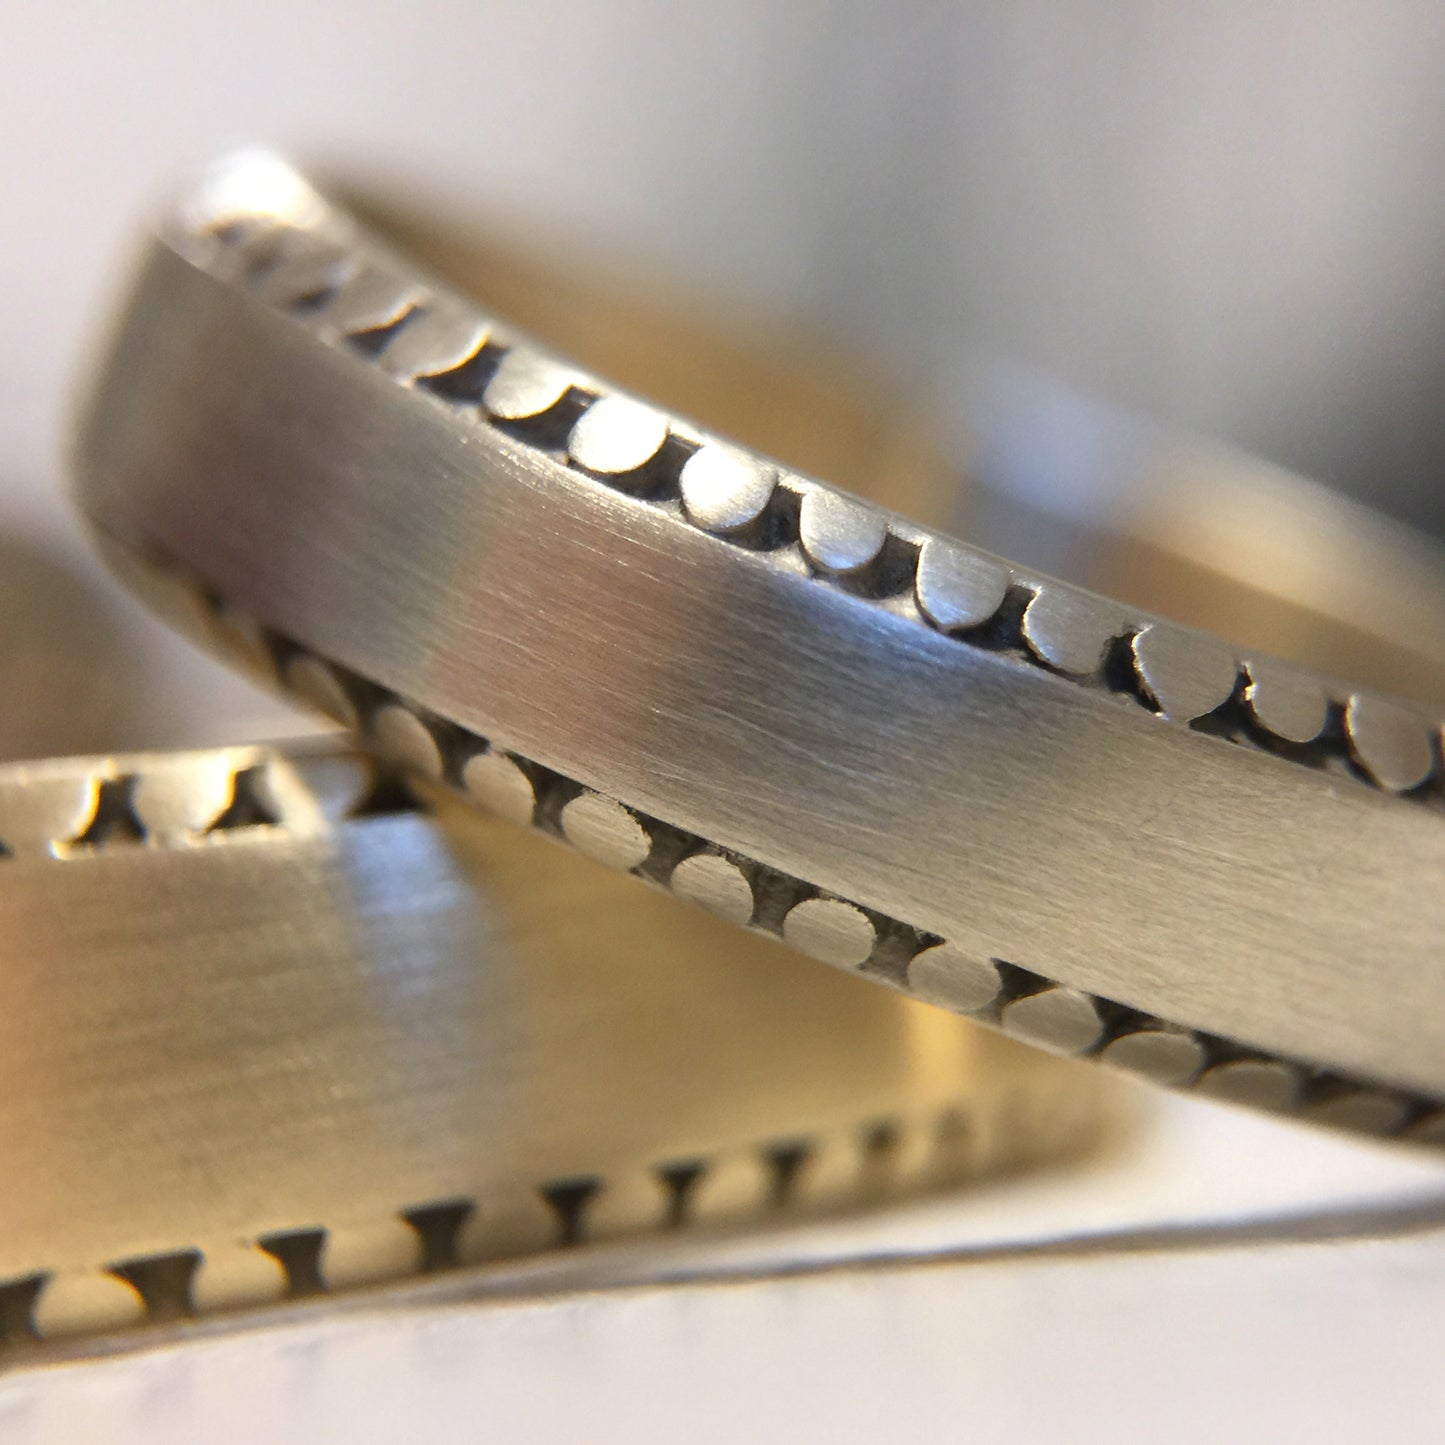 Plain Costa Bands 4.9 mm in 18K white gold and 6.1 mm in 18K yellow gold, detail